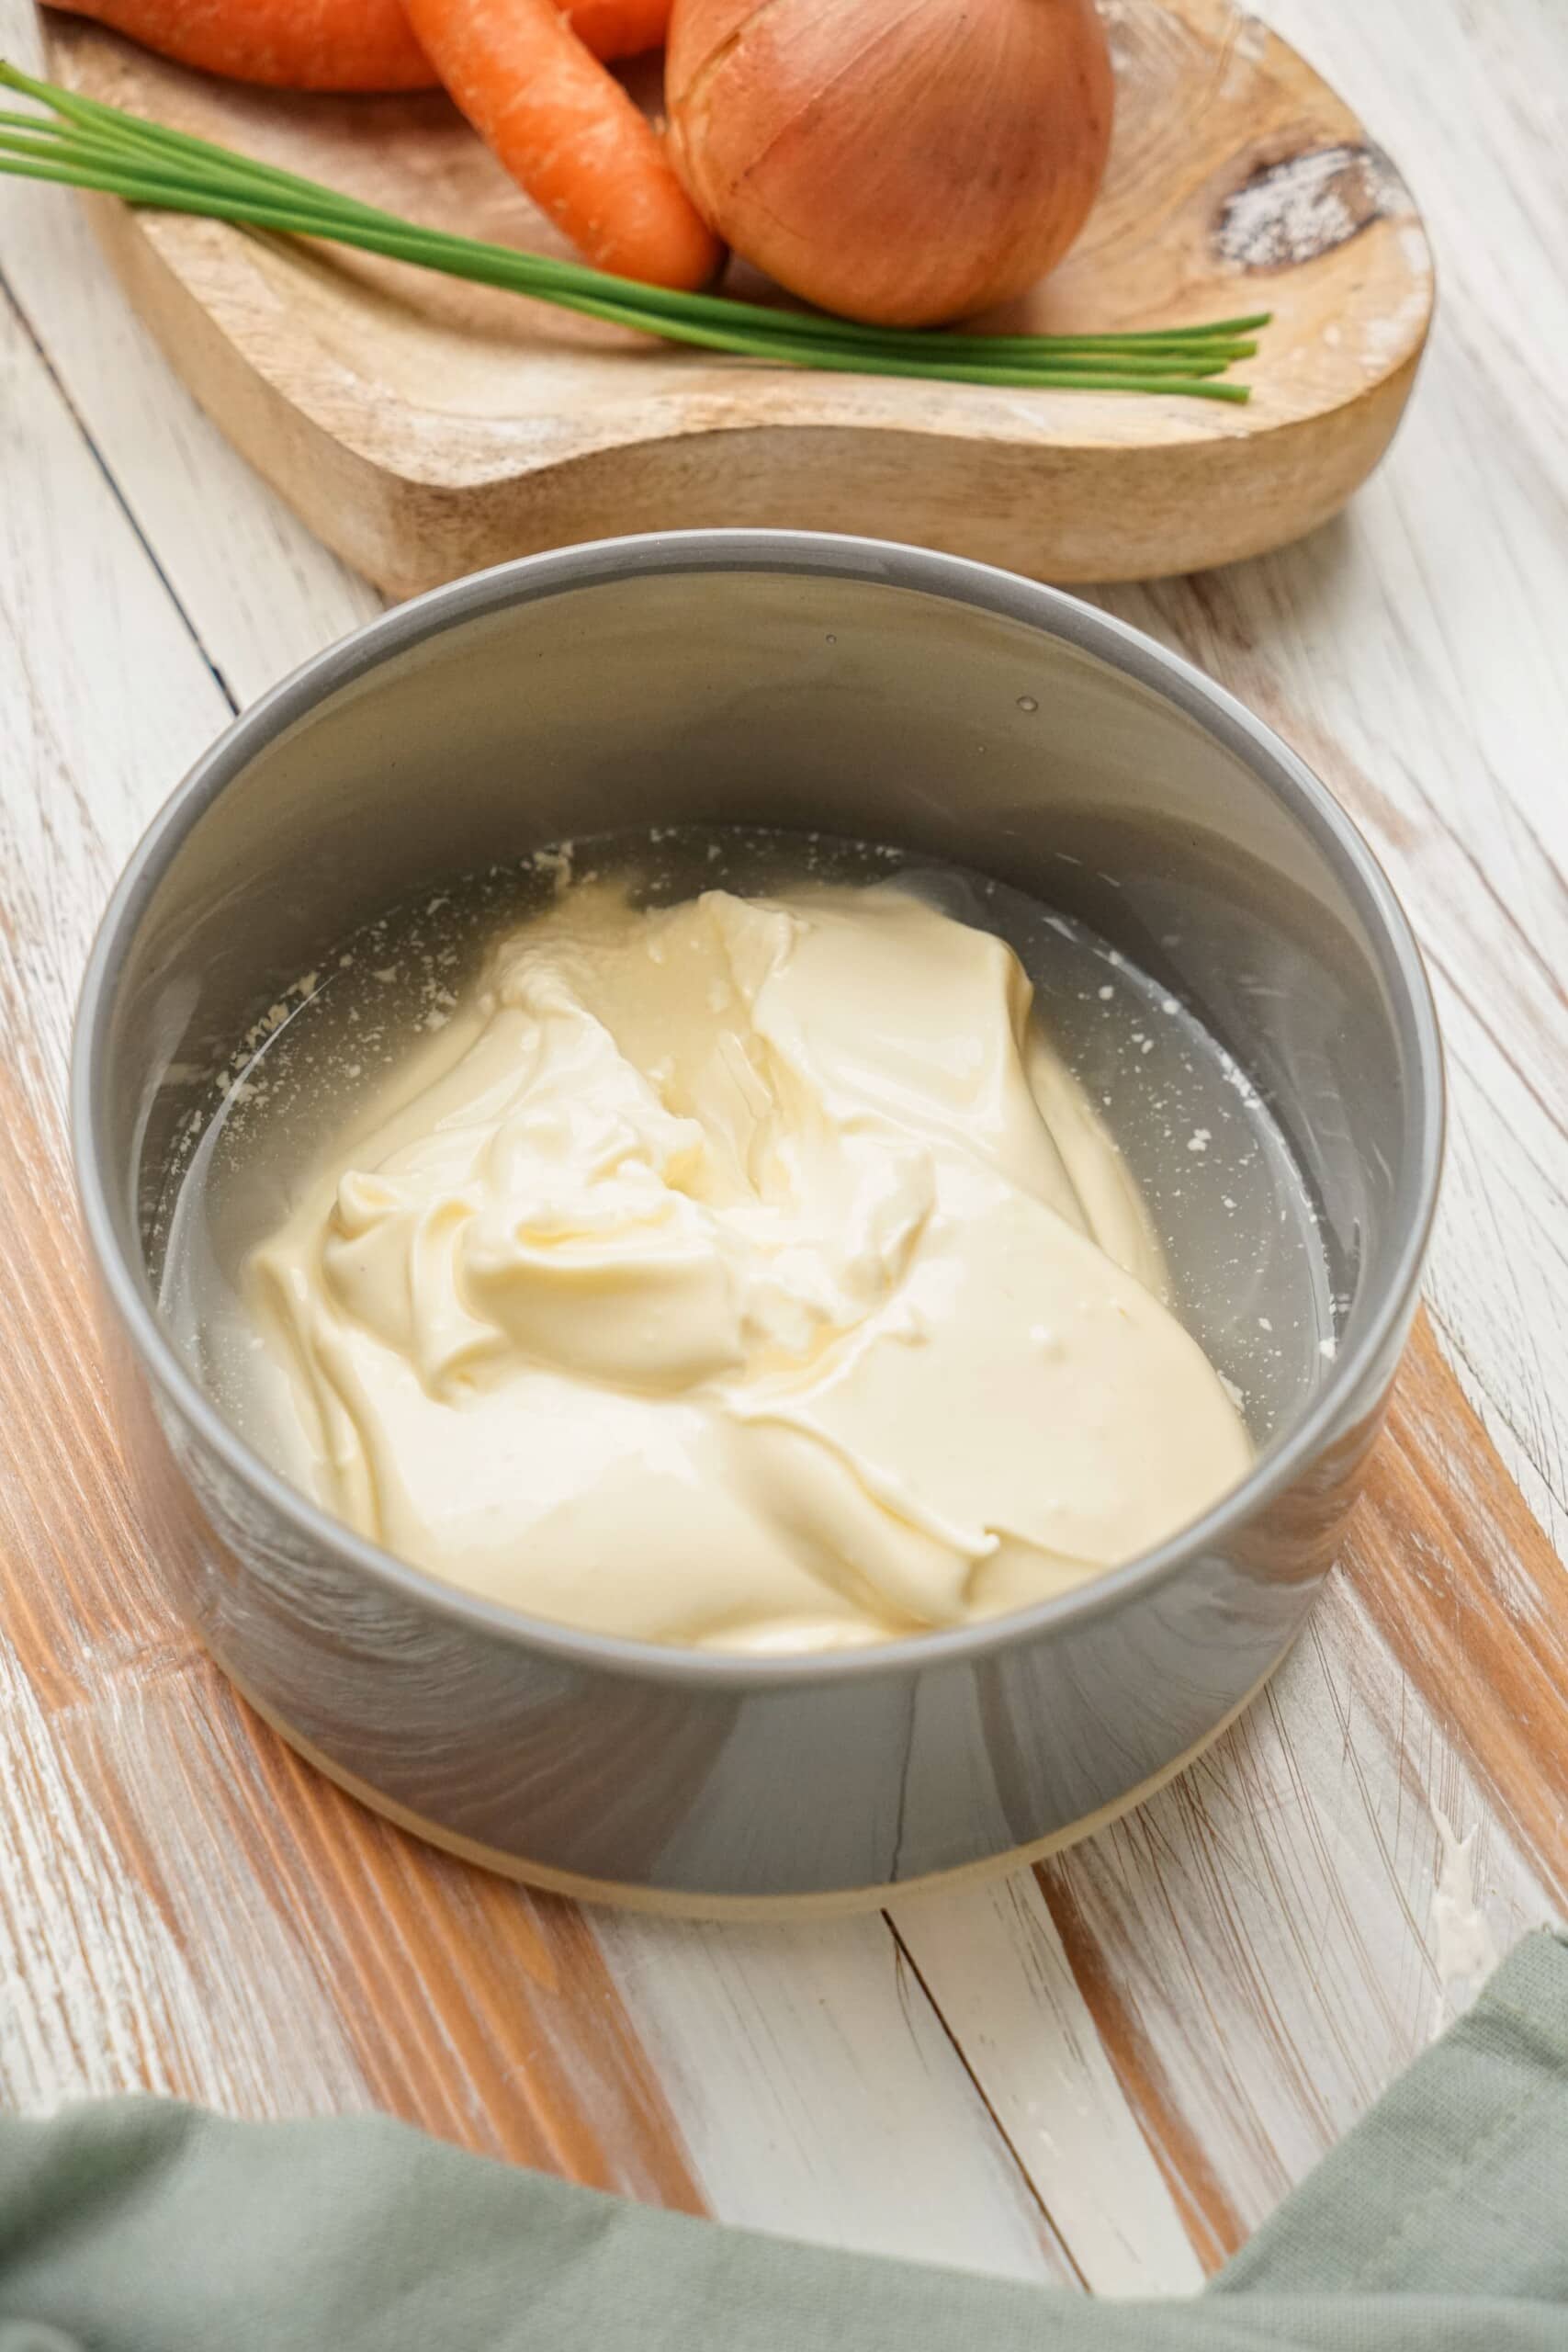 mayo and vinegar in a bowl